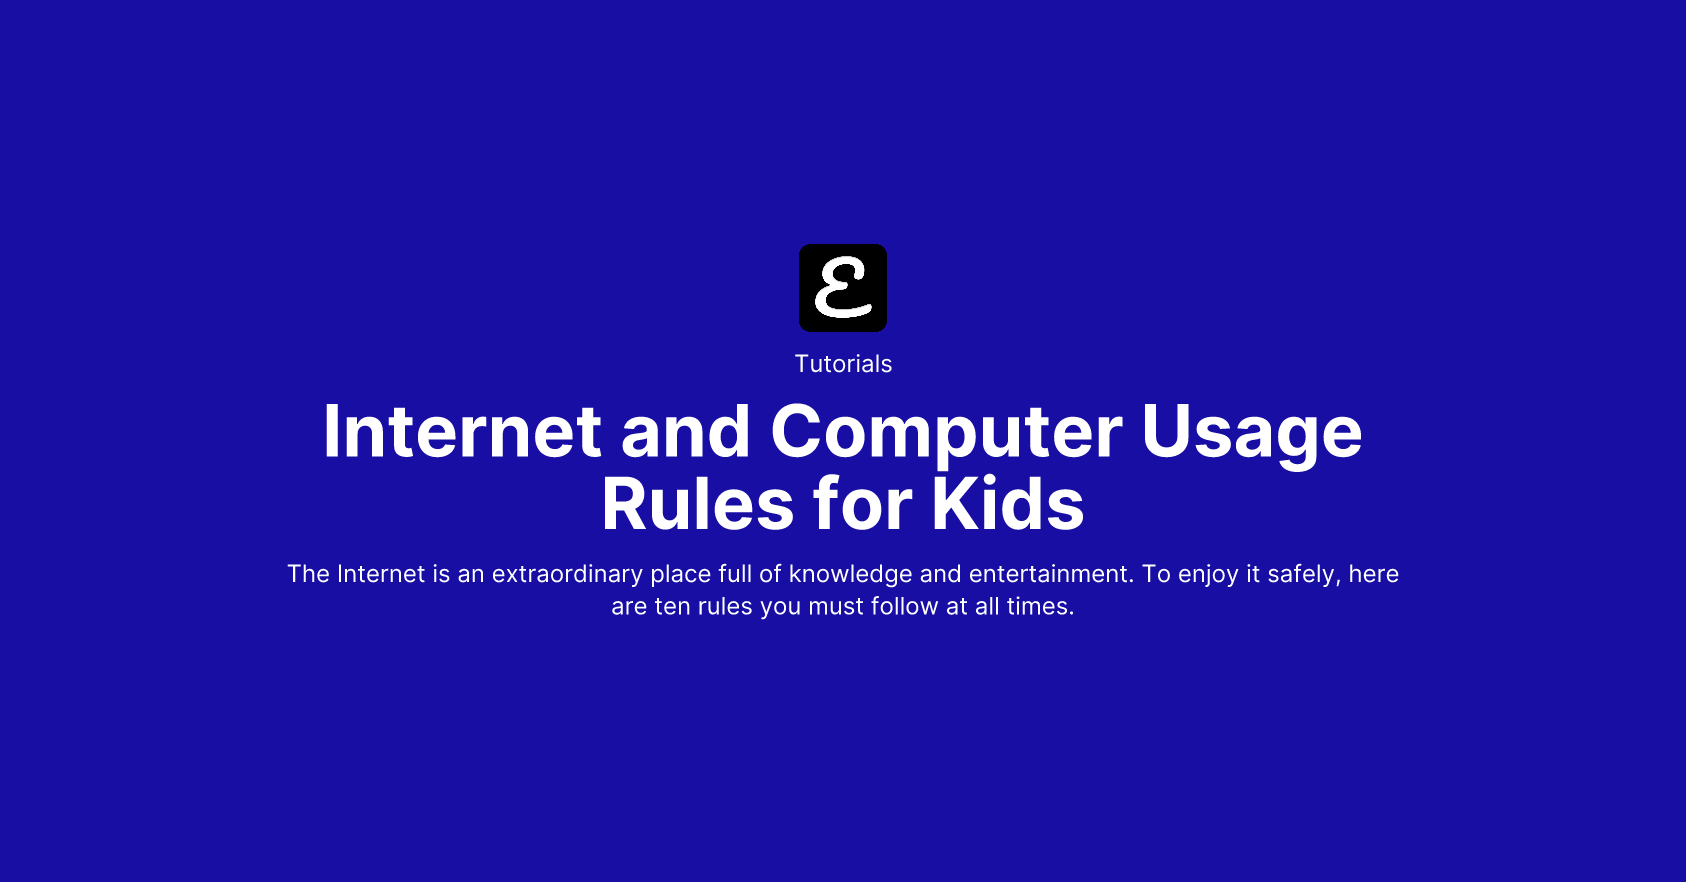 Internet and Computer Usage Rules for Kids by Eric David Smith